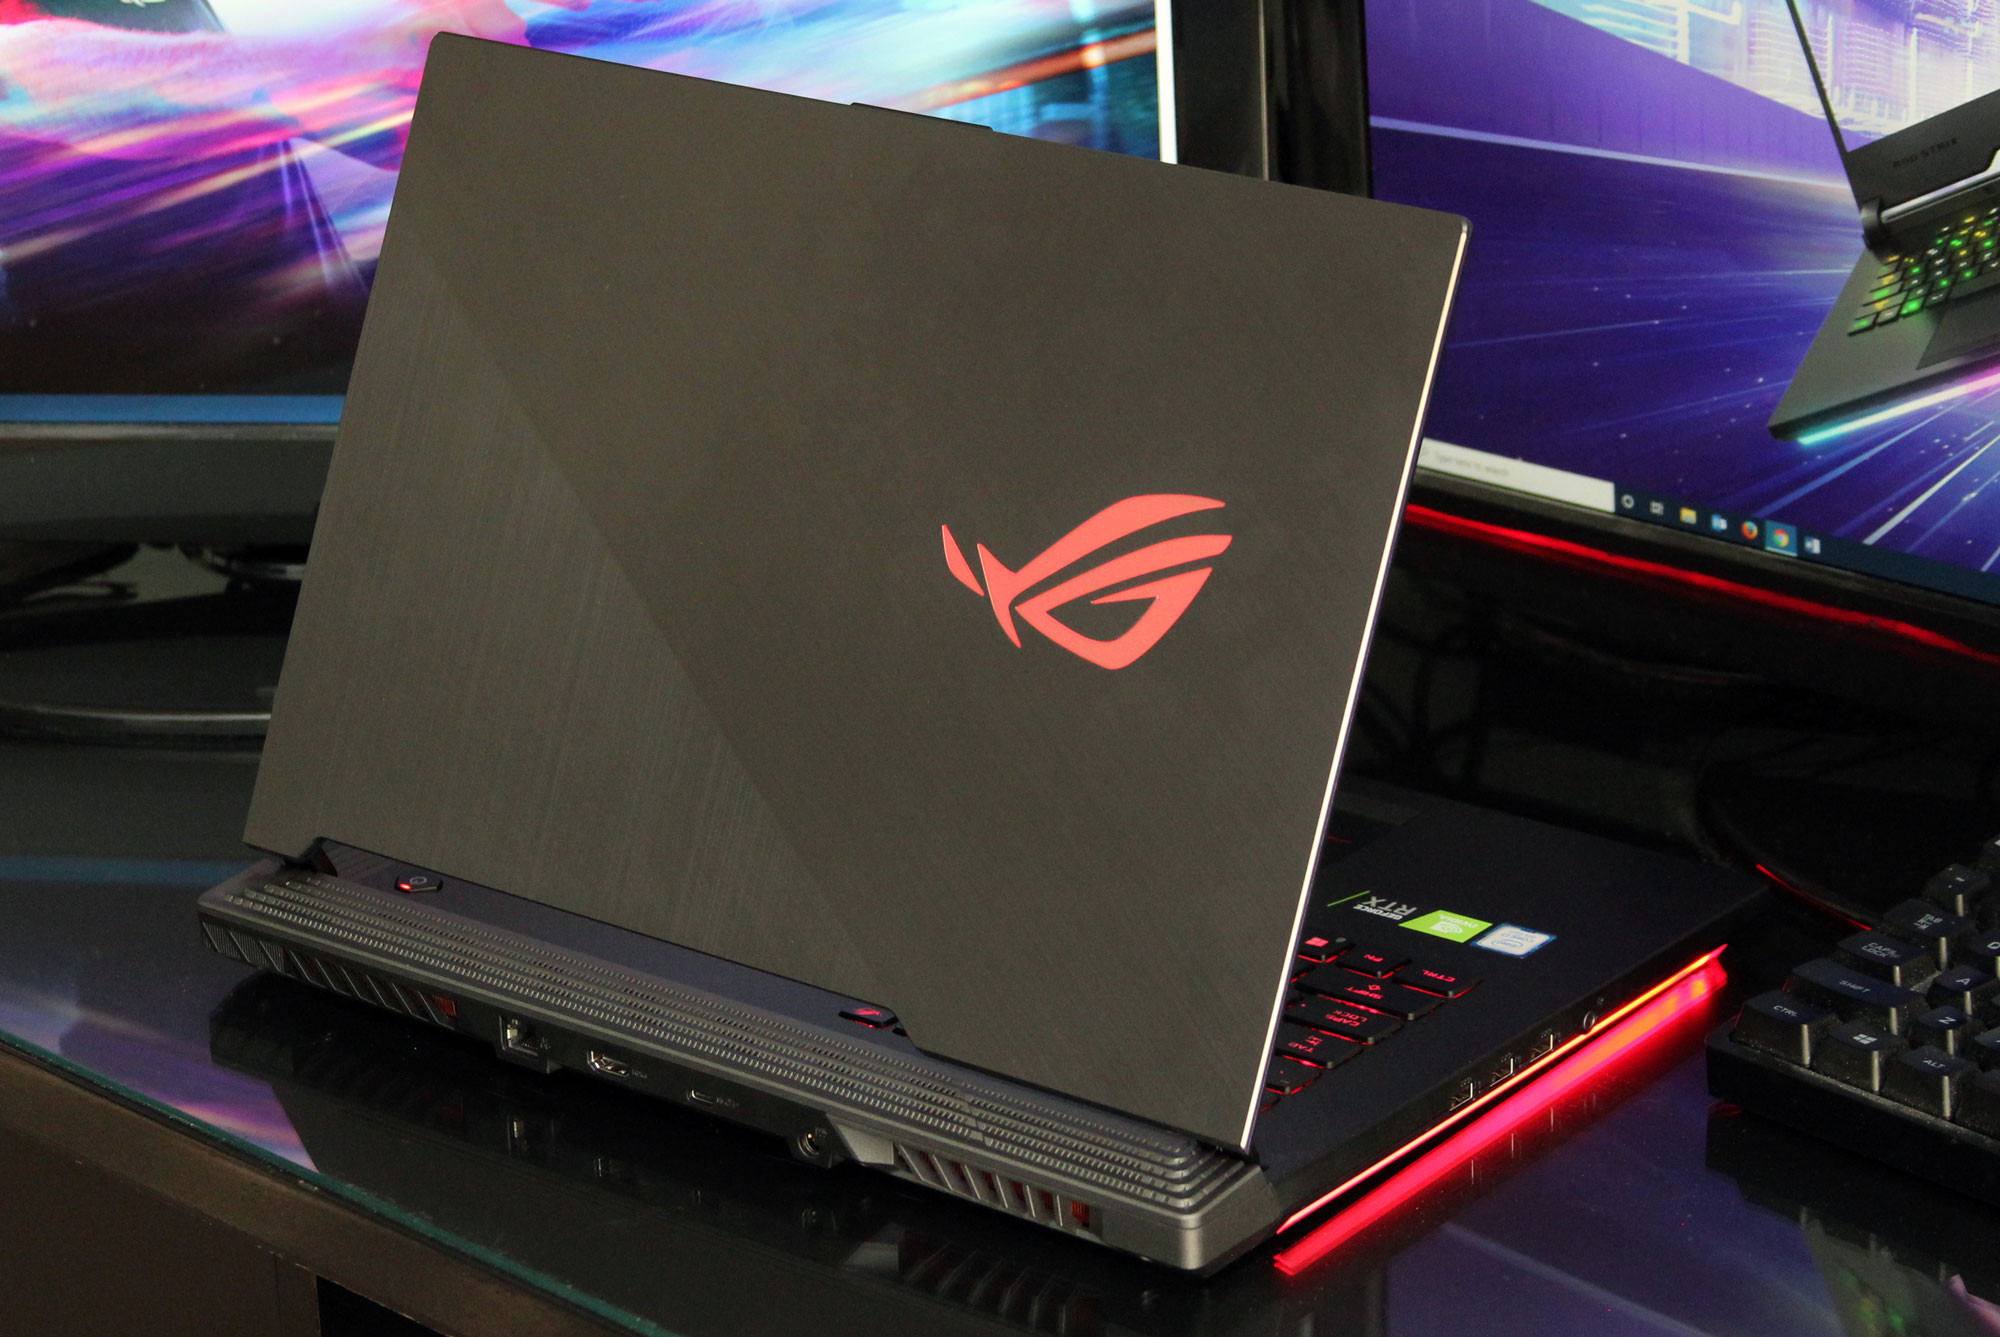 Basking in the glory of 240Hz gaming with the ROG Strix SCAR III | ROG -  Republic of Gamers Global